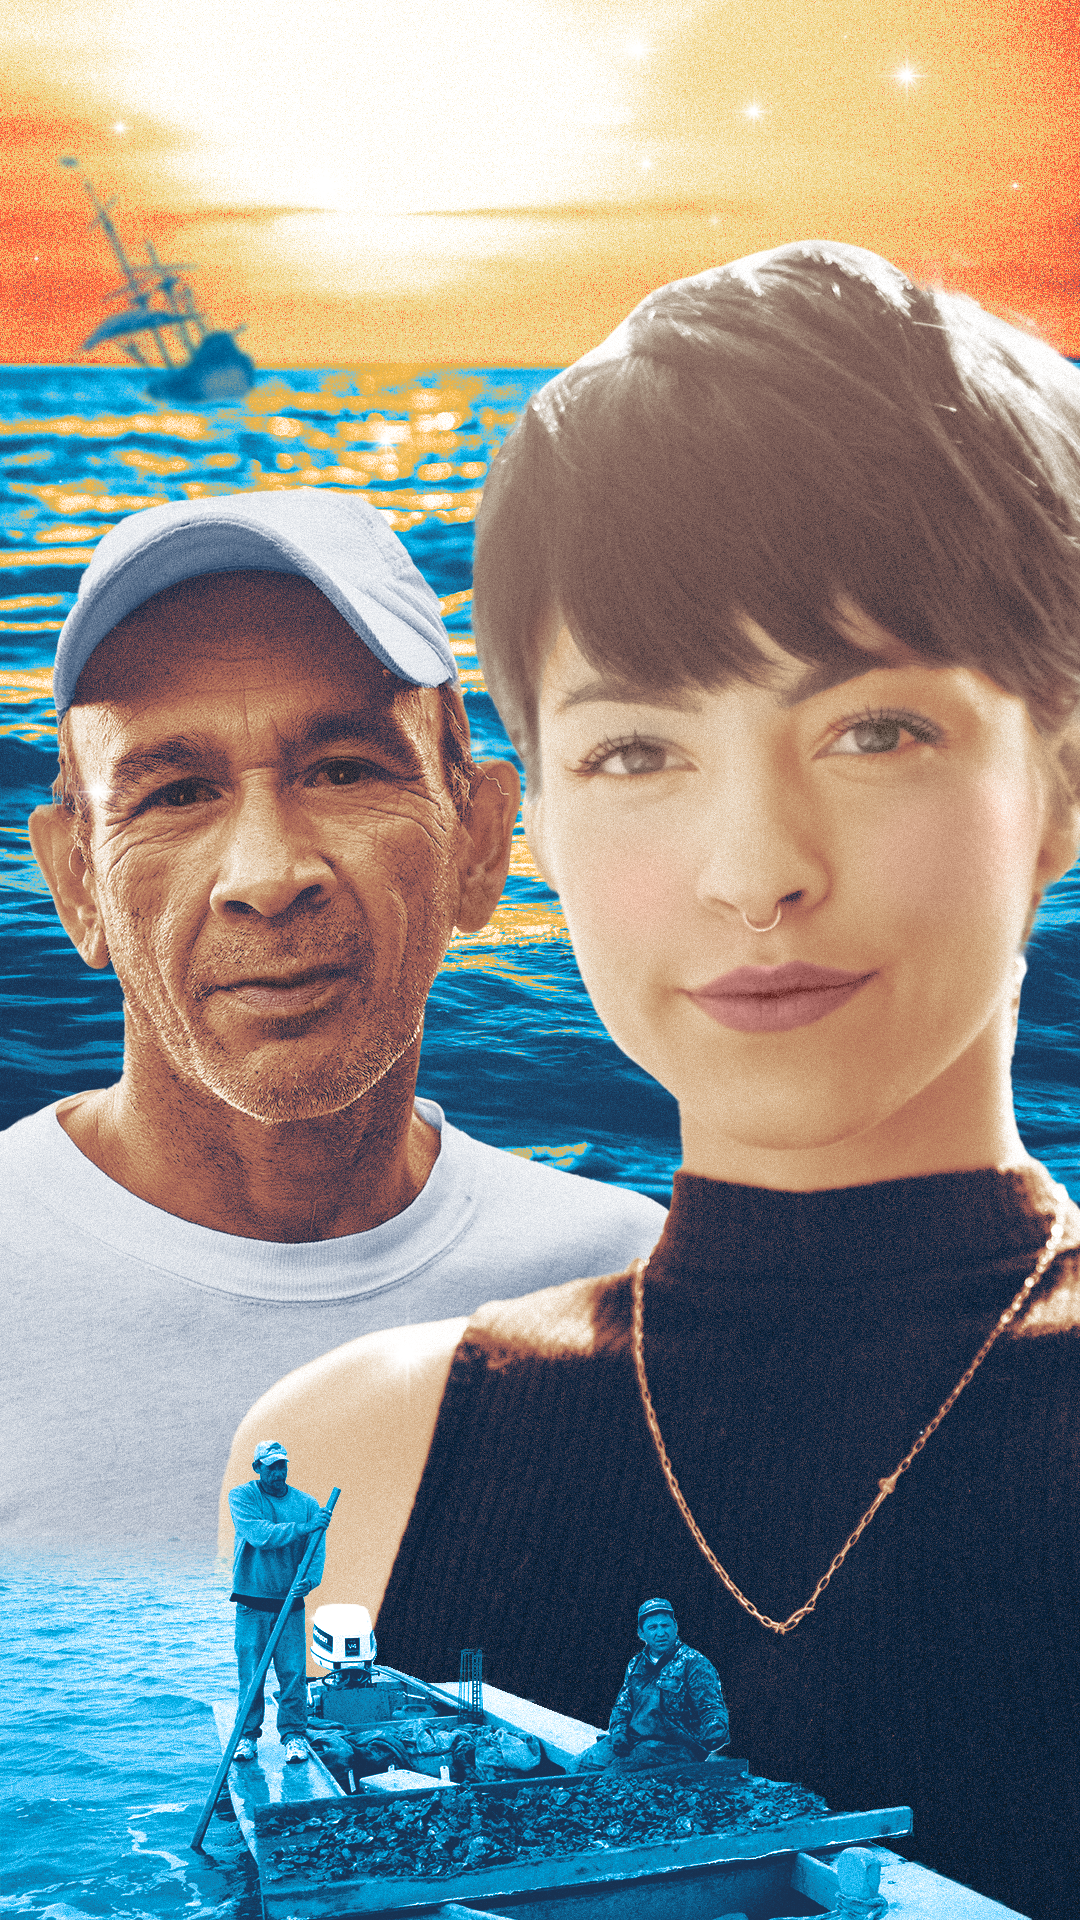 A portrait of Gerald and Lucy, a young woman with short hair and a nose ring, and an older man wearing a baseball cap. In the background is an image of a sunset over water, with an old-style sailing ship on the horizon. In the foreground is an image of two men harvesting oysters in a boat.